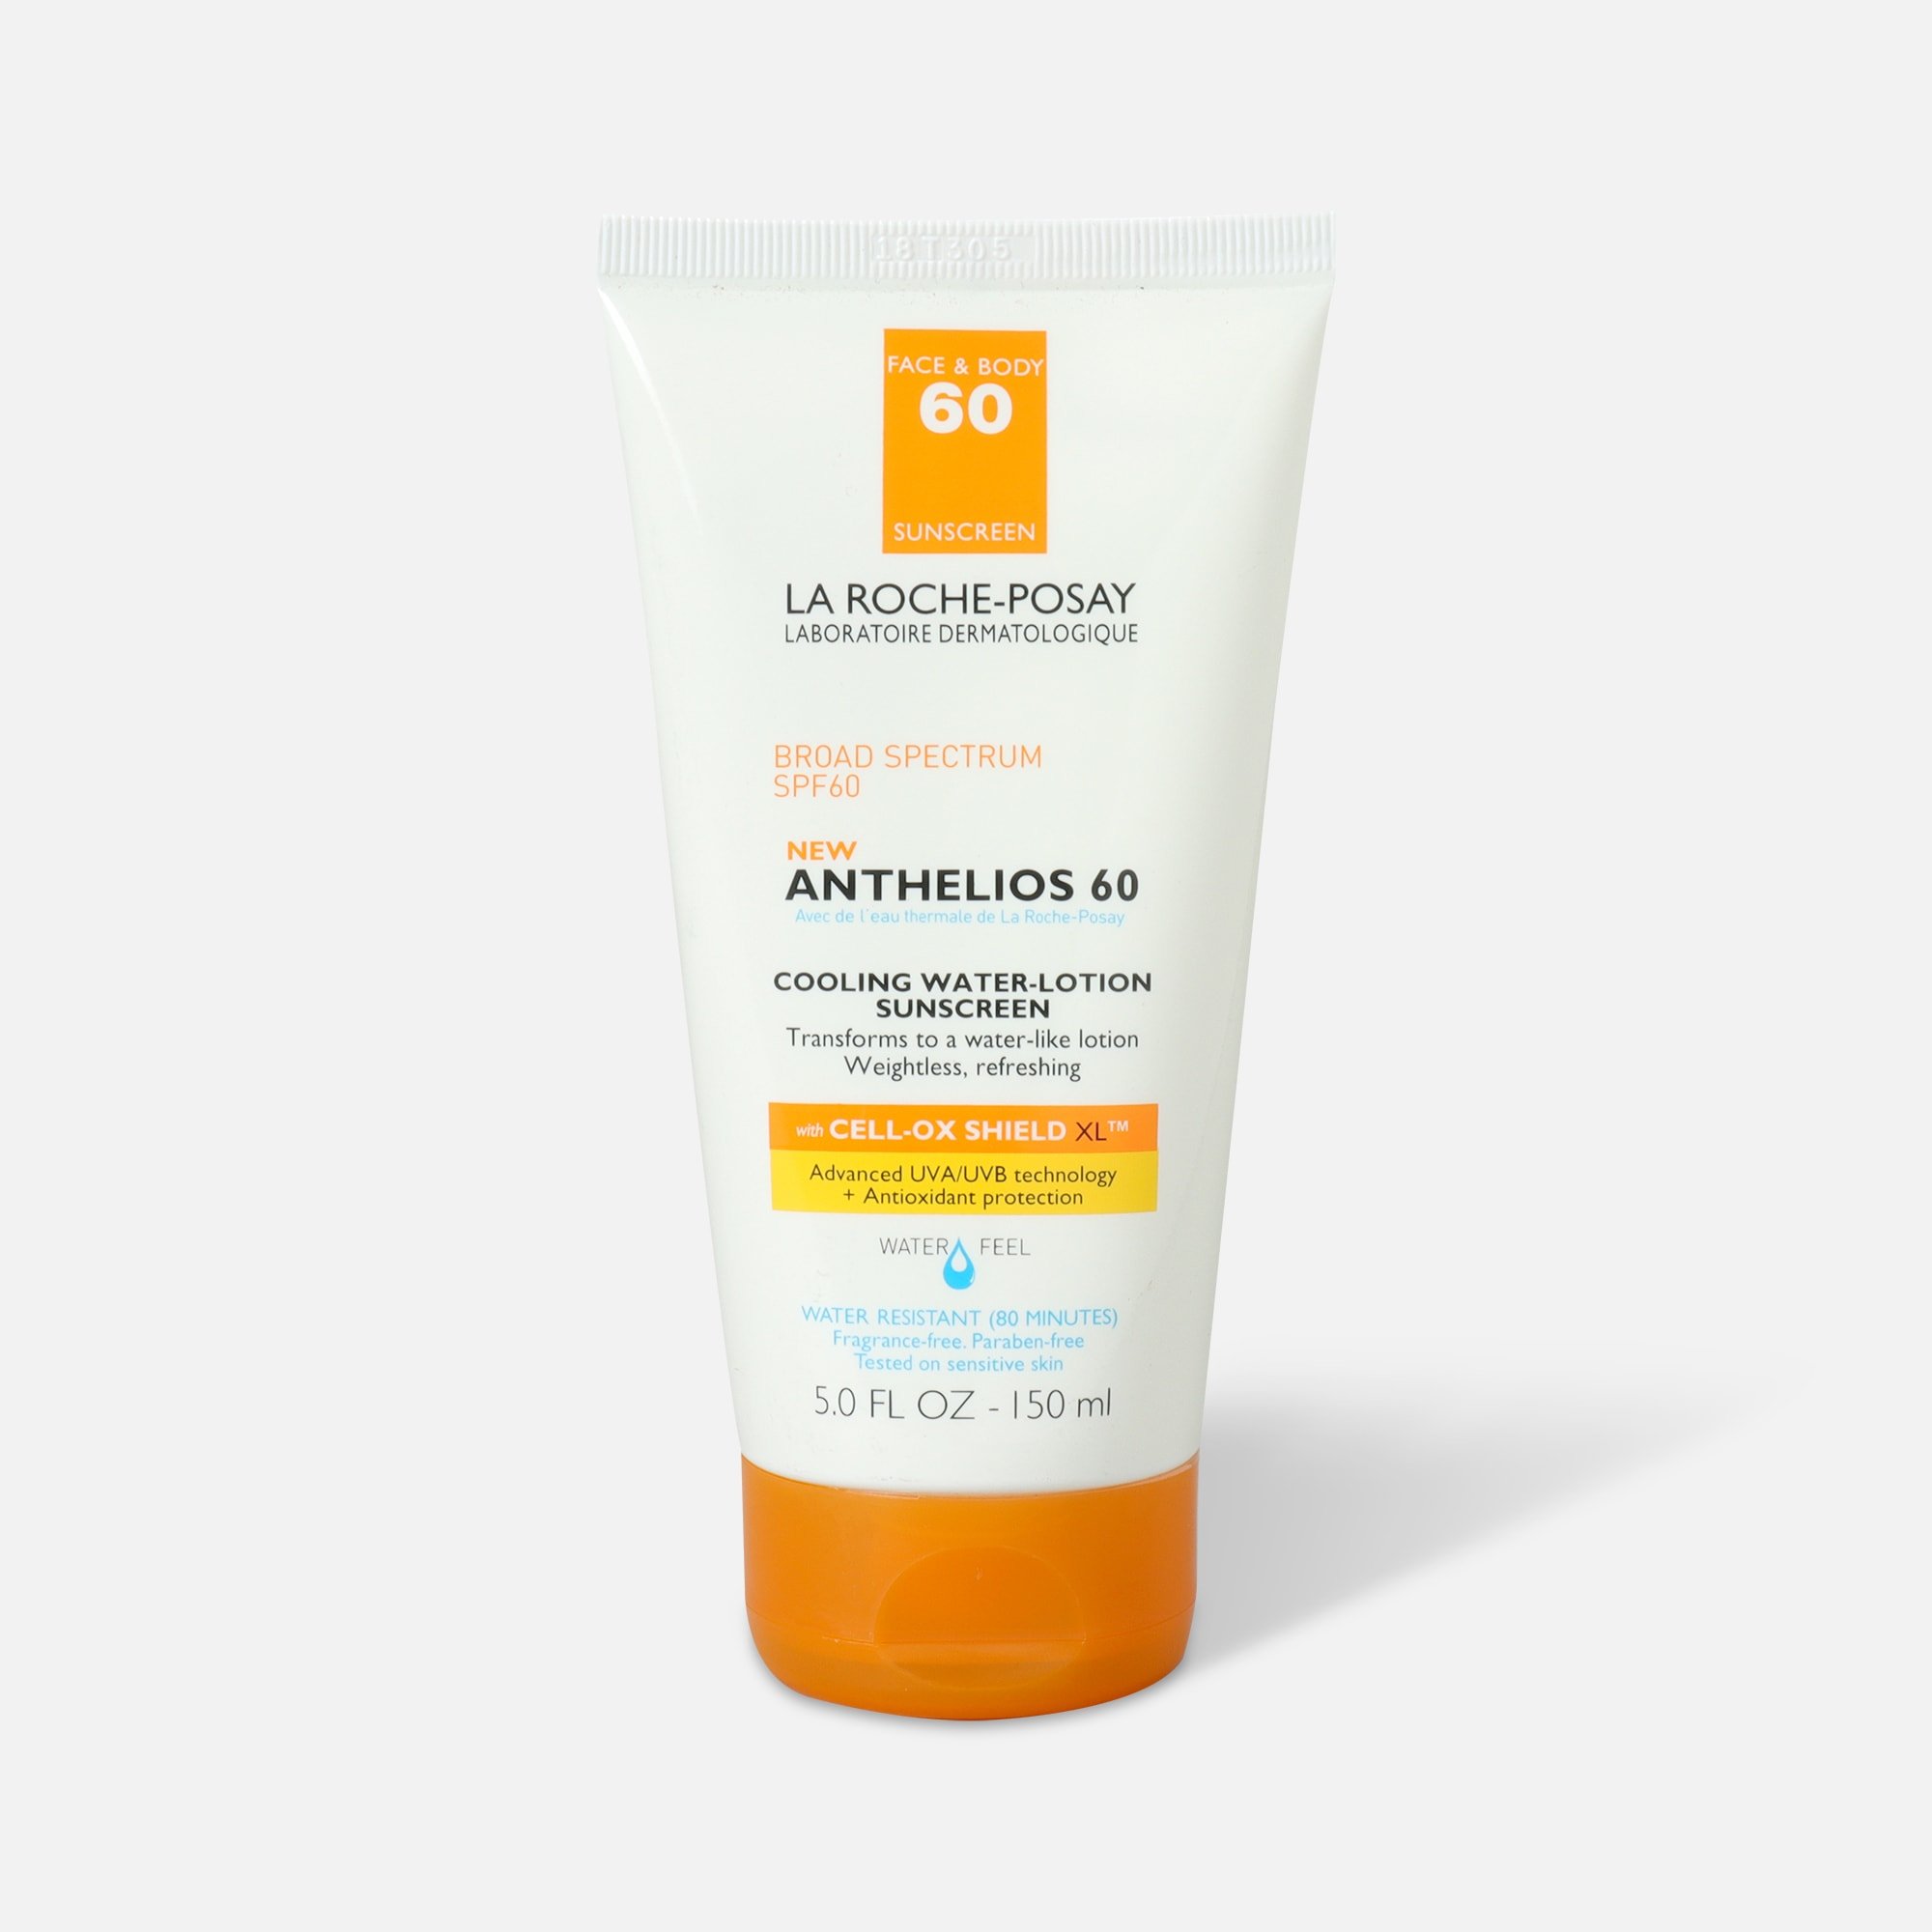 La Roche-Posay Anthelios Cooling Water Sunscreen Lotion, 5 fl oz